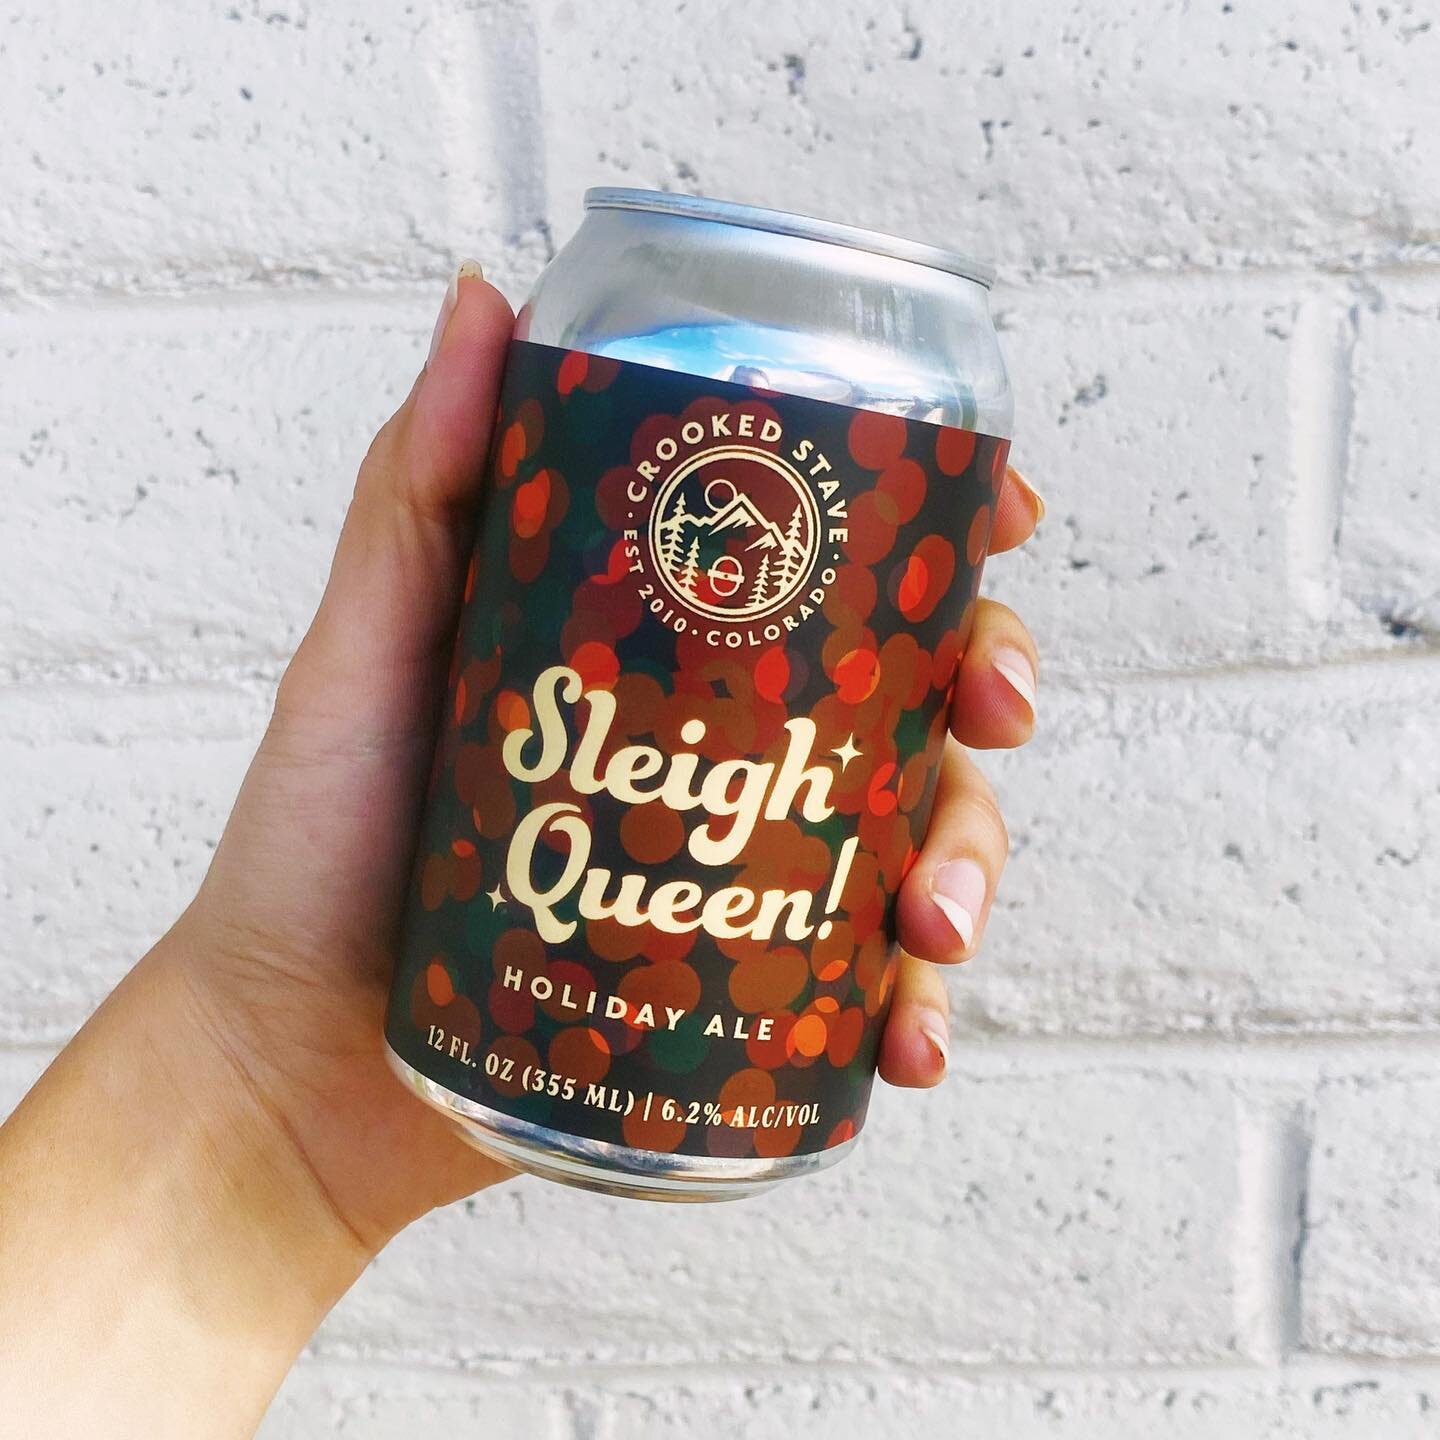 Get ready to Sleigh Queen! Our spiced Holiday Ale is here! Brewed with nutmeg and cinnamon.